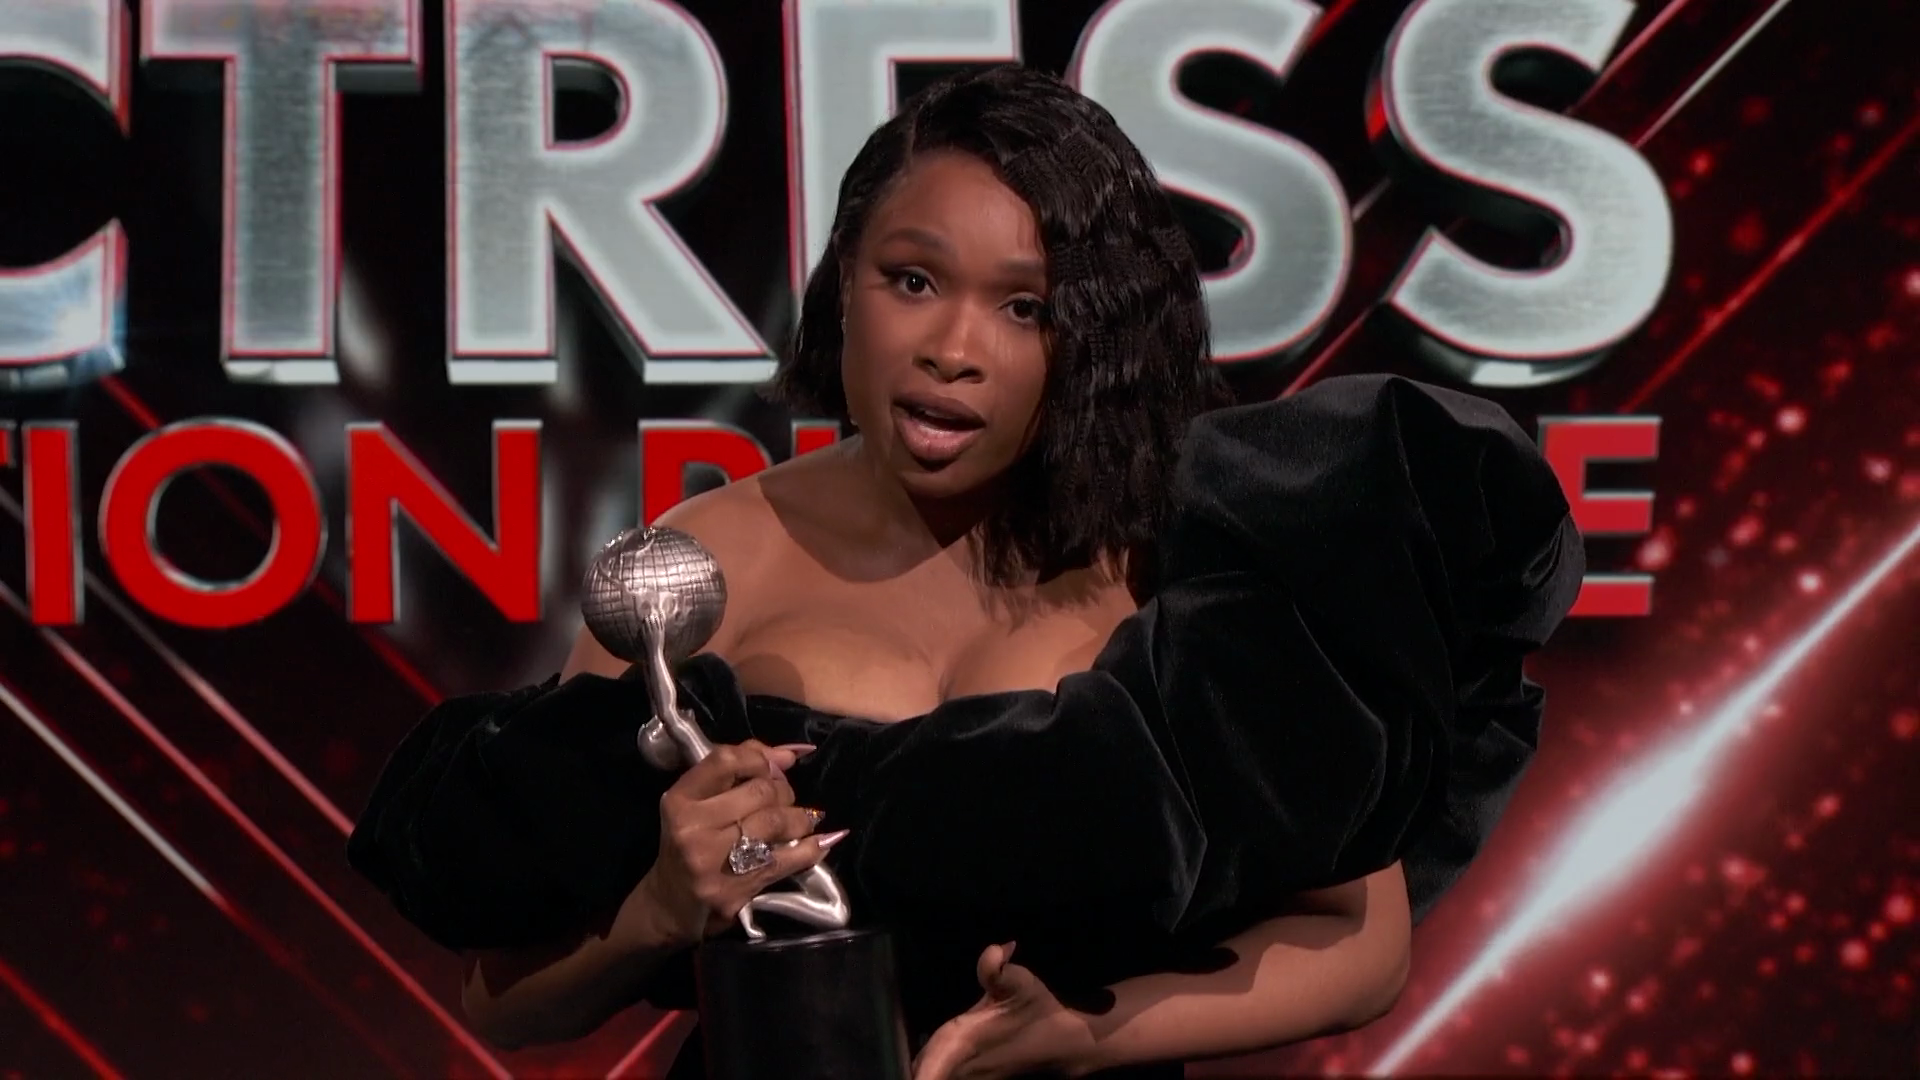 Jennifer Hudson dedicates her award to the family of the late Aretha Franklin as she accepts the trophy for Outstanding Actress in a Motion Picture for her role in "Respect."